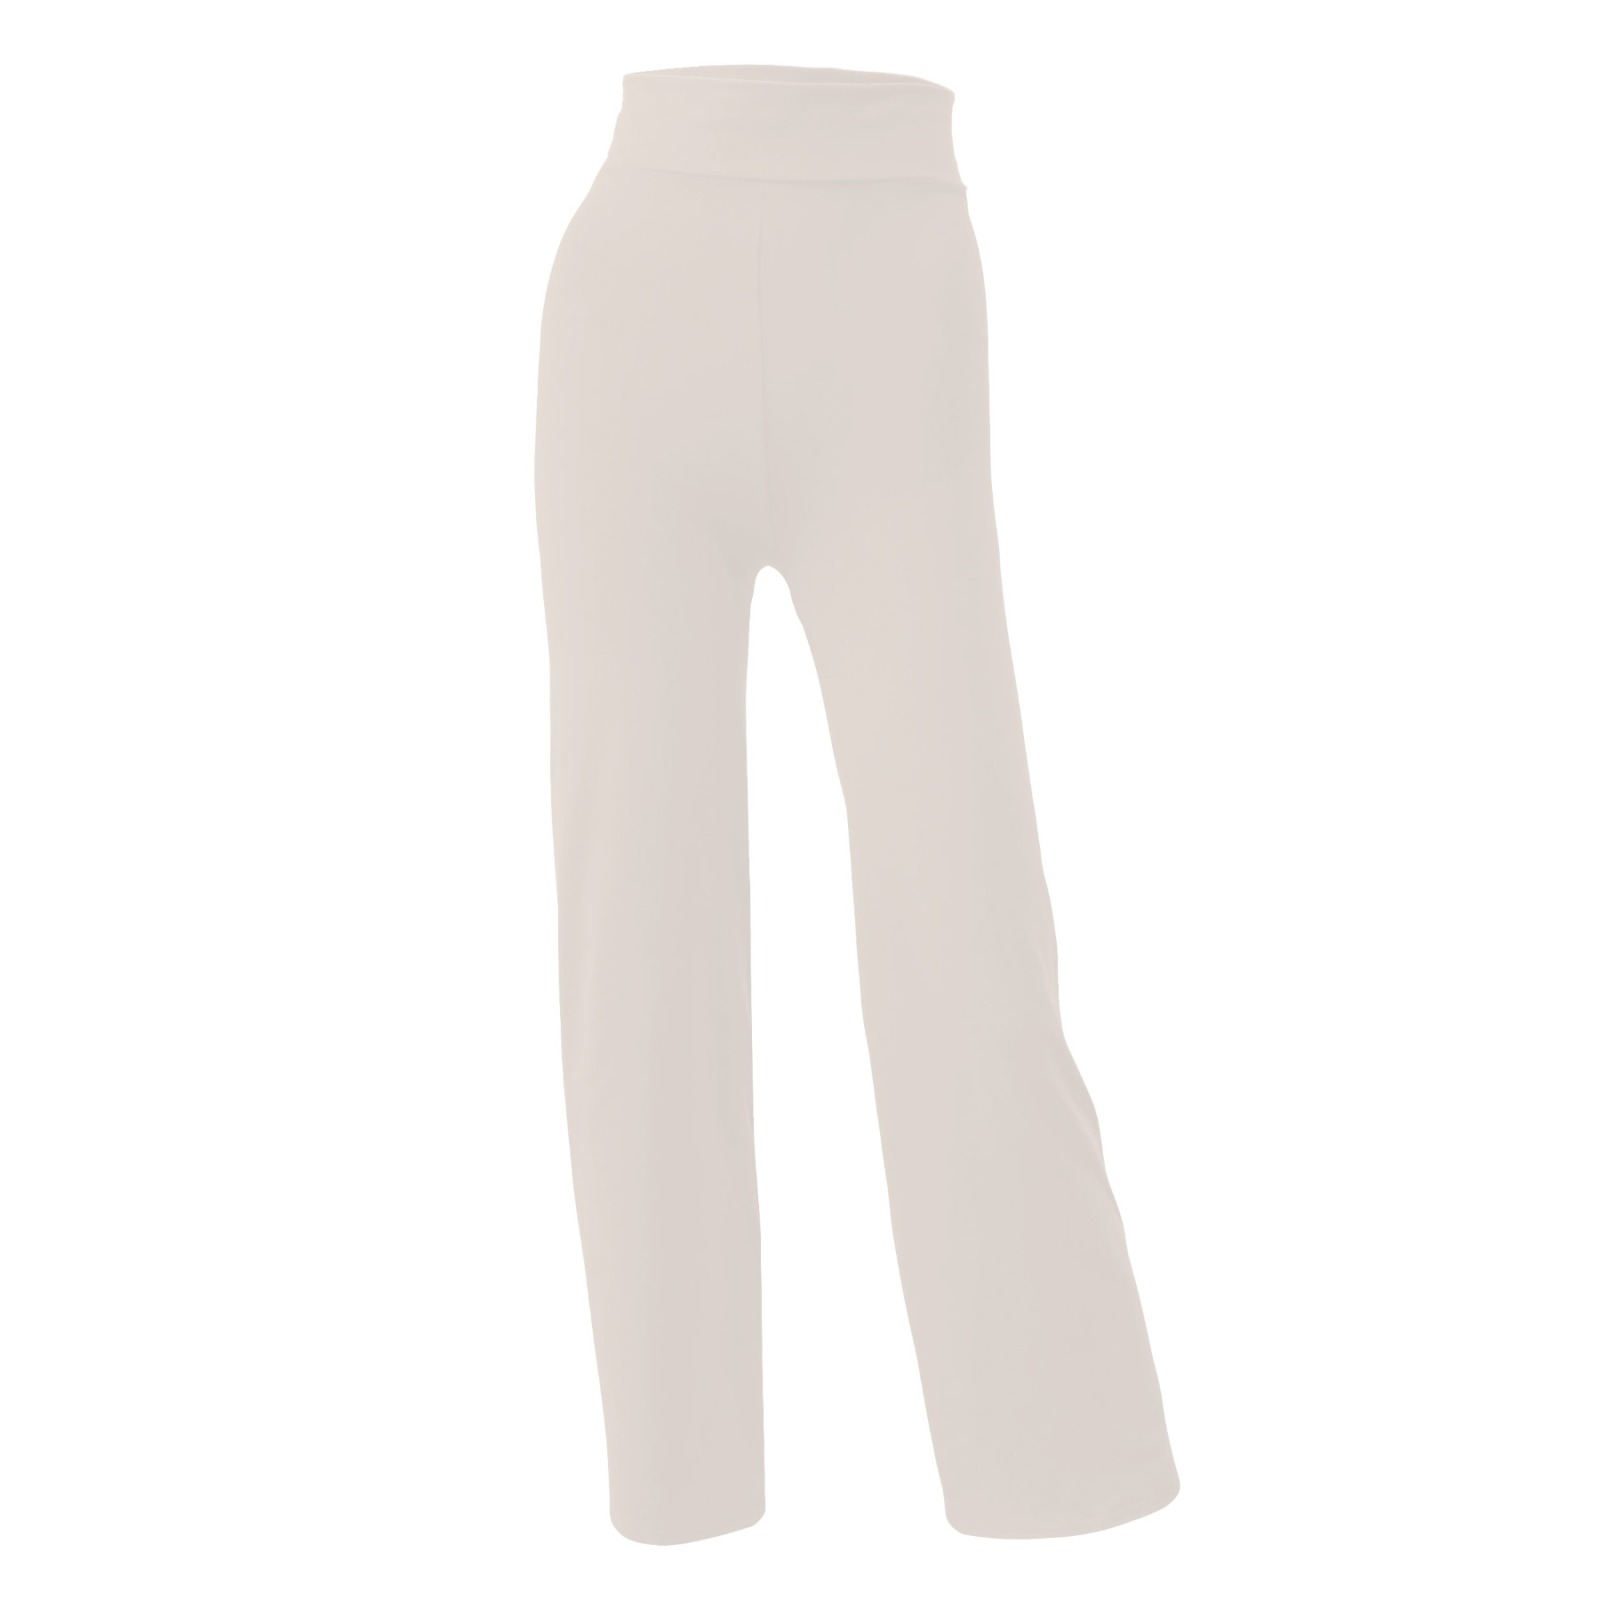 Yoga pants Relaxed Fit ecru natural white